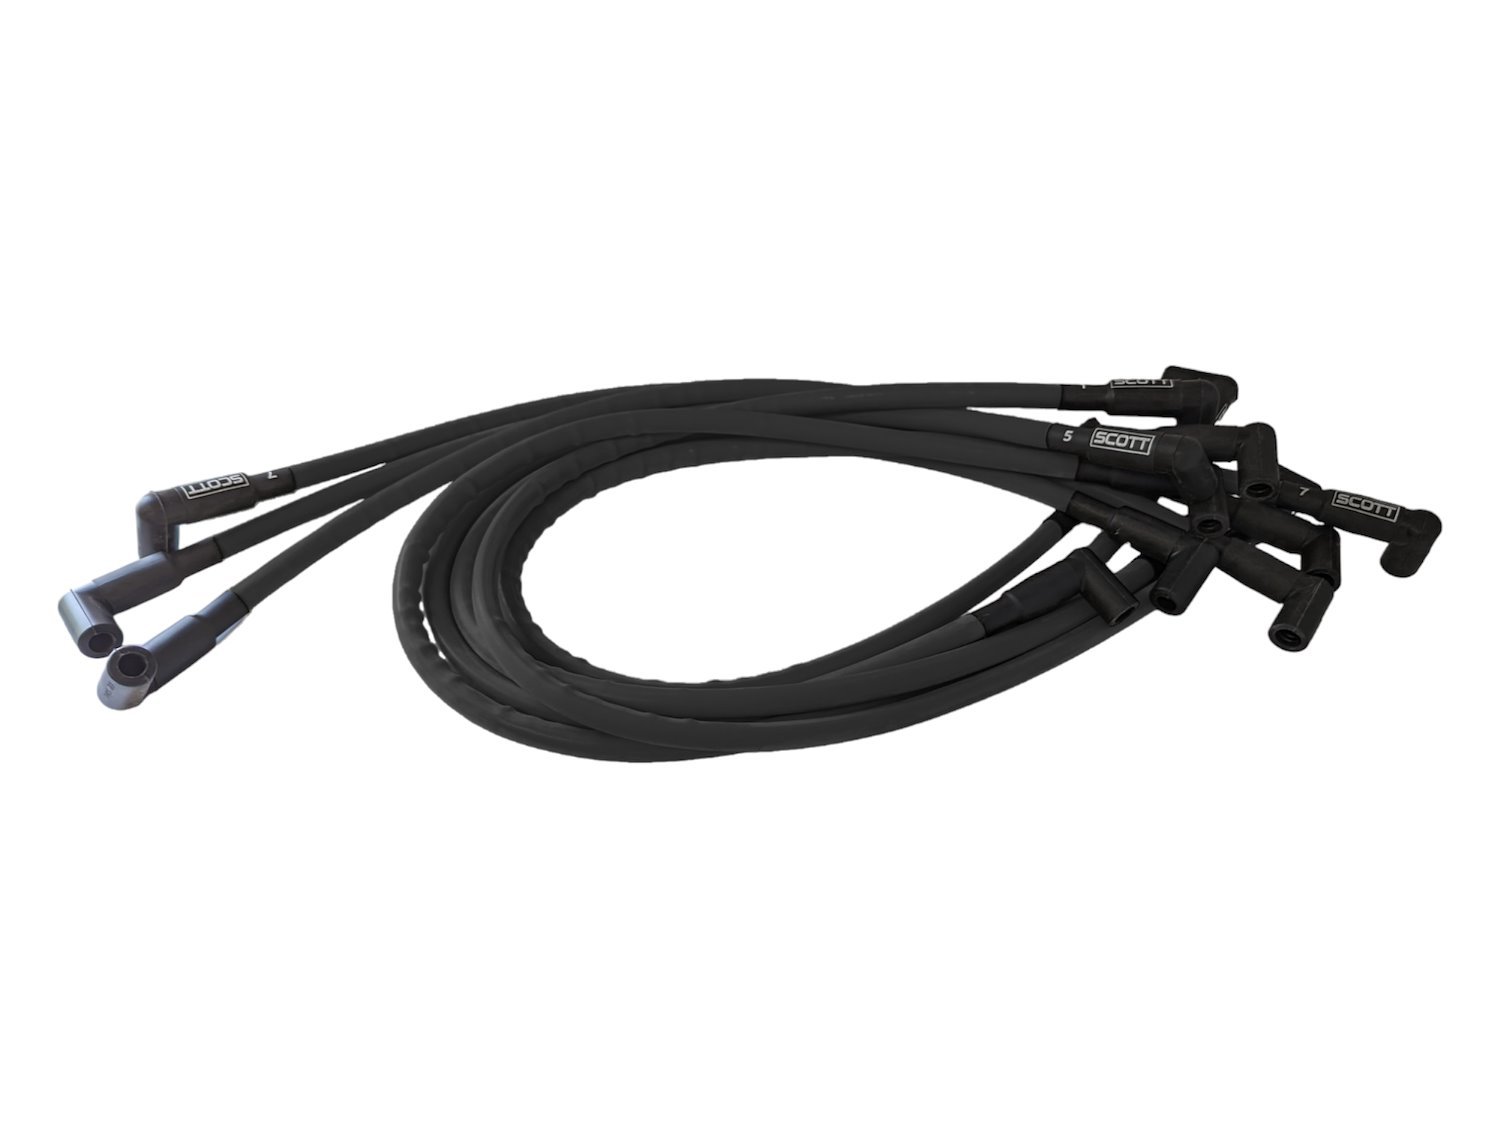 SPW-CH-416-1 High-Performance Silicone-Sleeved Spark Plug Wire Set for Big Block Chevy, Under Header [Black]